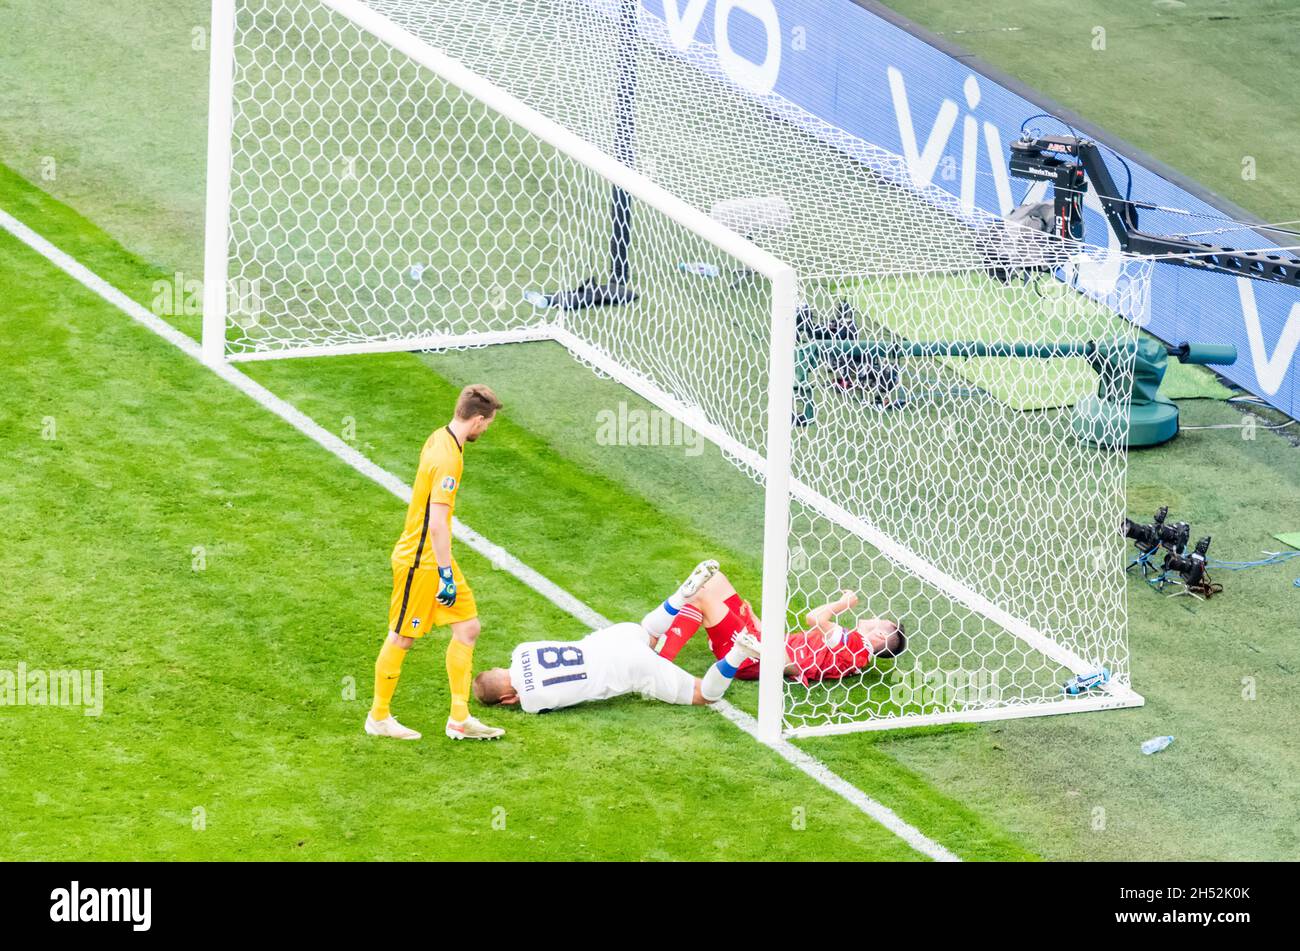 Saint Petersburg, Russia – June 16, 2021. Players Jere Uronen and Vyacheslav Karavayev tangled in the goalmouth  during EURO 2020 match Finland vs Rus Stock Photo